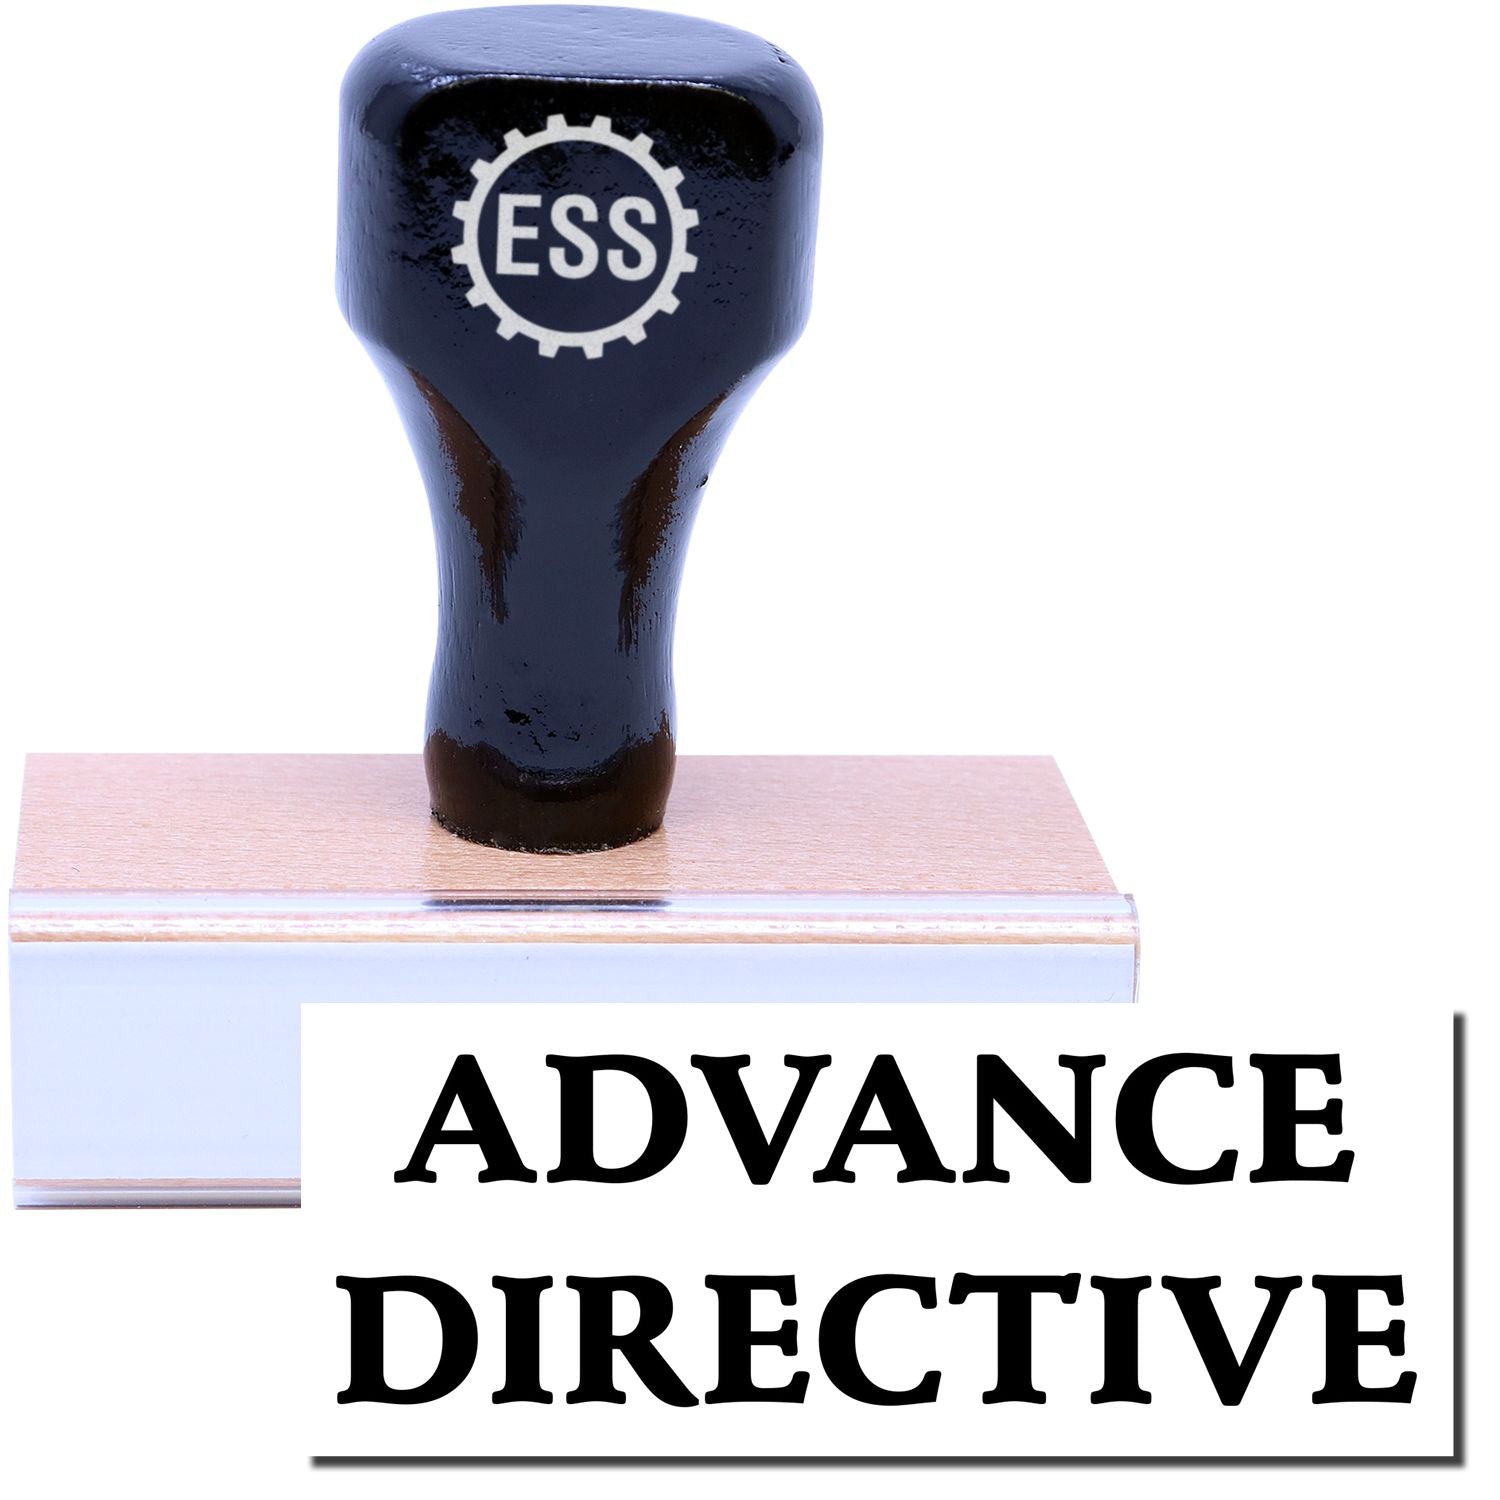 A stock office rubber stamp with a stamped image showing how the text "ADVANCE DIRECTIVE" is displayed after stamping.